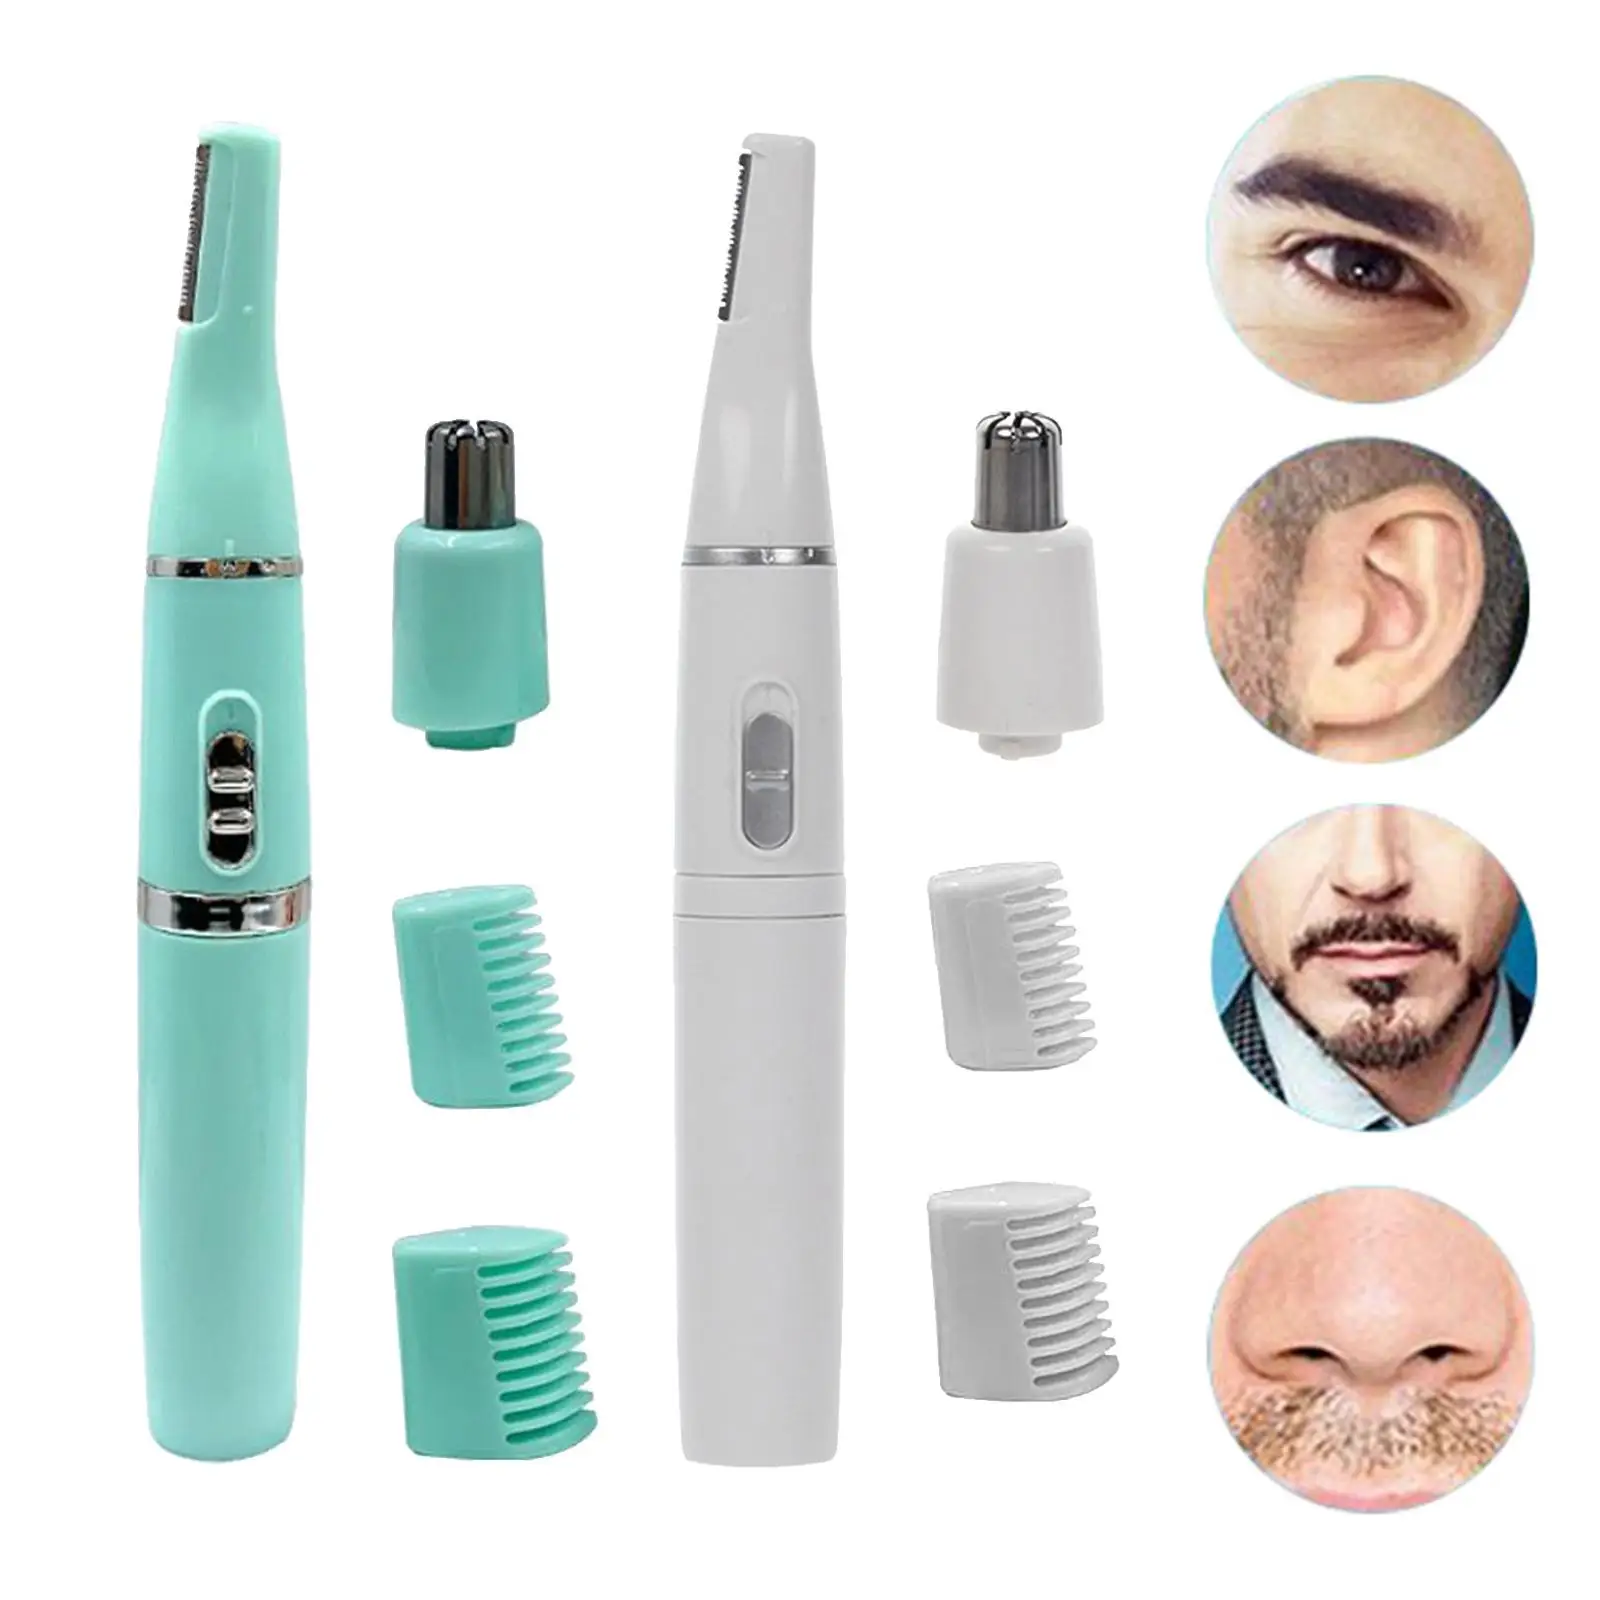 Nose Eyebrow Trimmer Two in One Blades Rinseable Easy to Clean Stainless Steel Multipurpose for Household Men Nose Hair Shaver